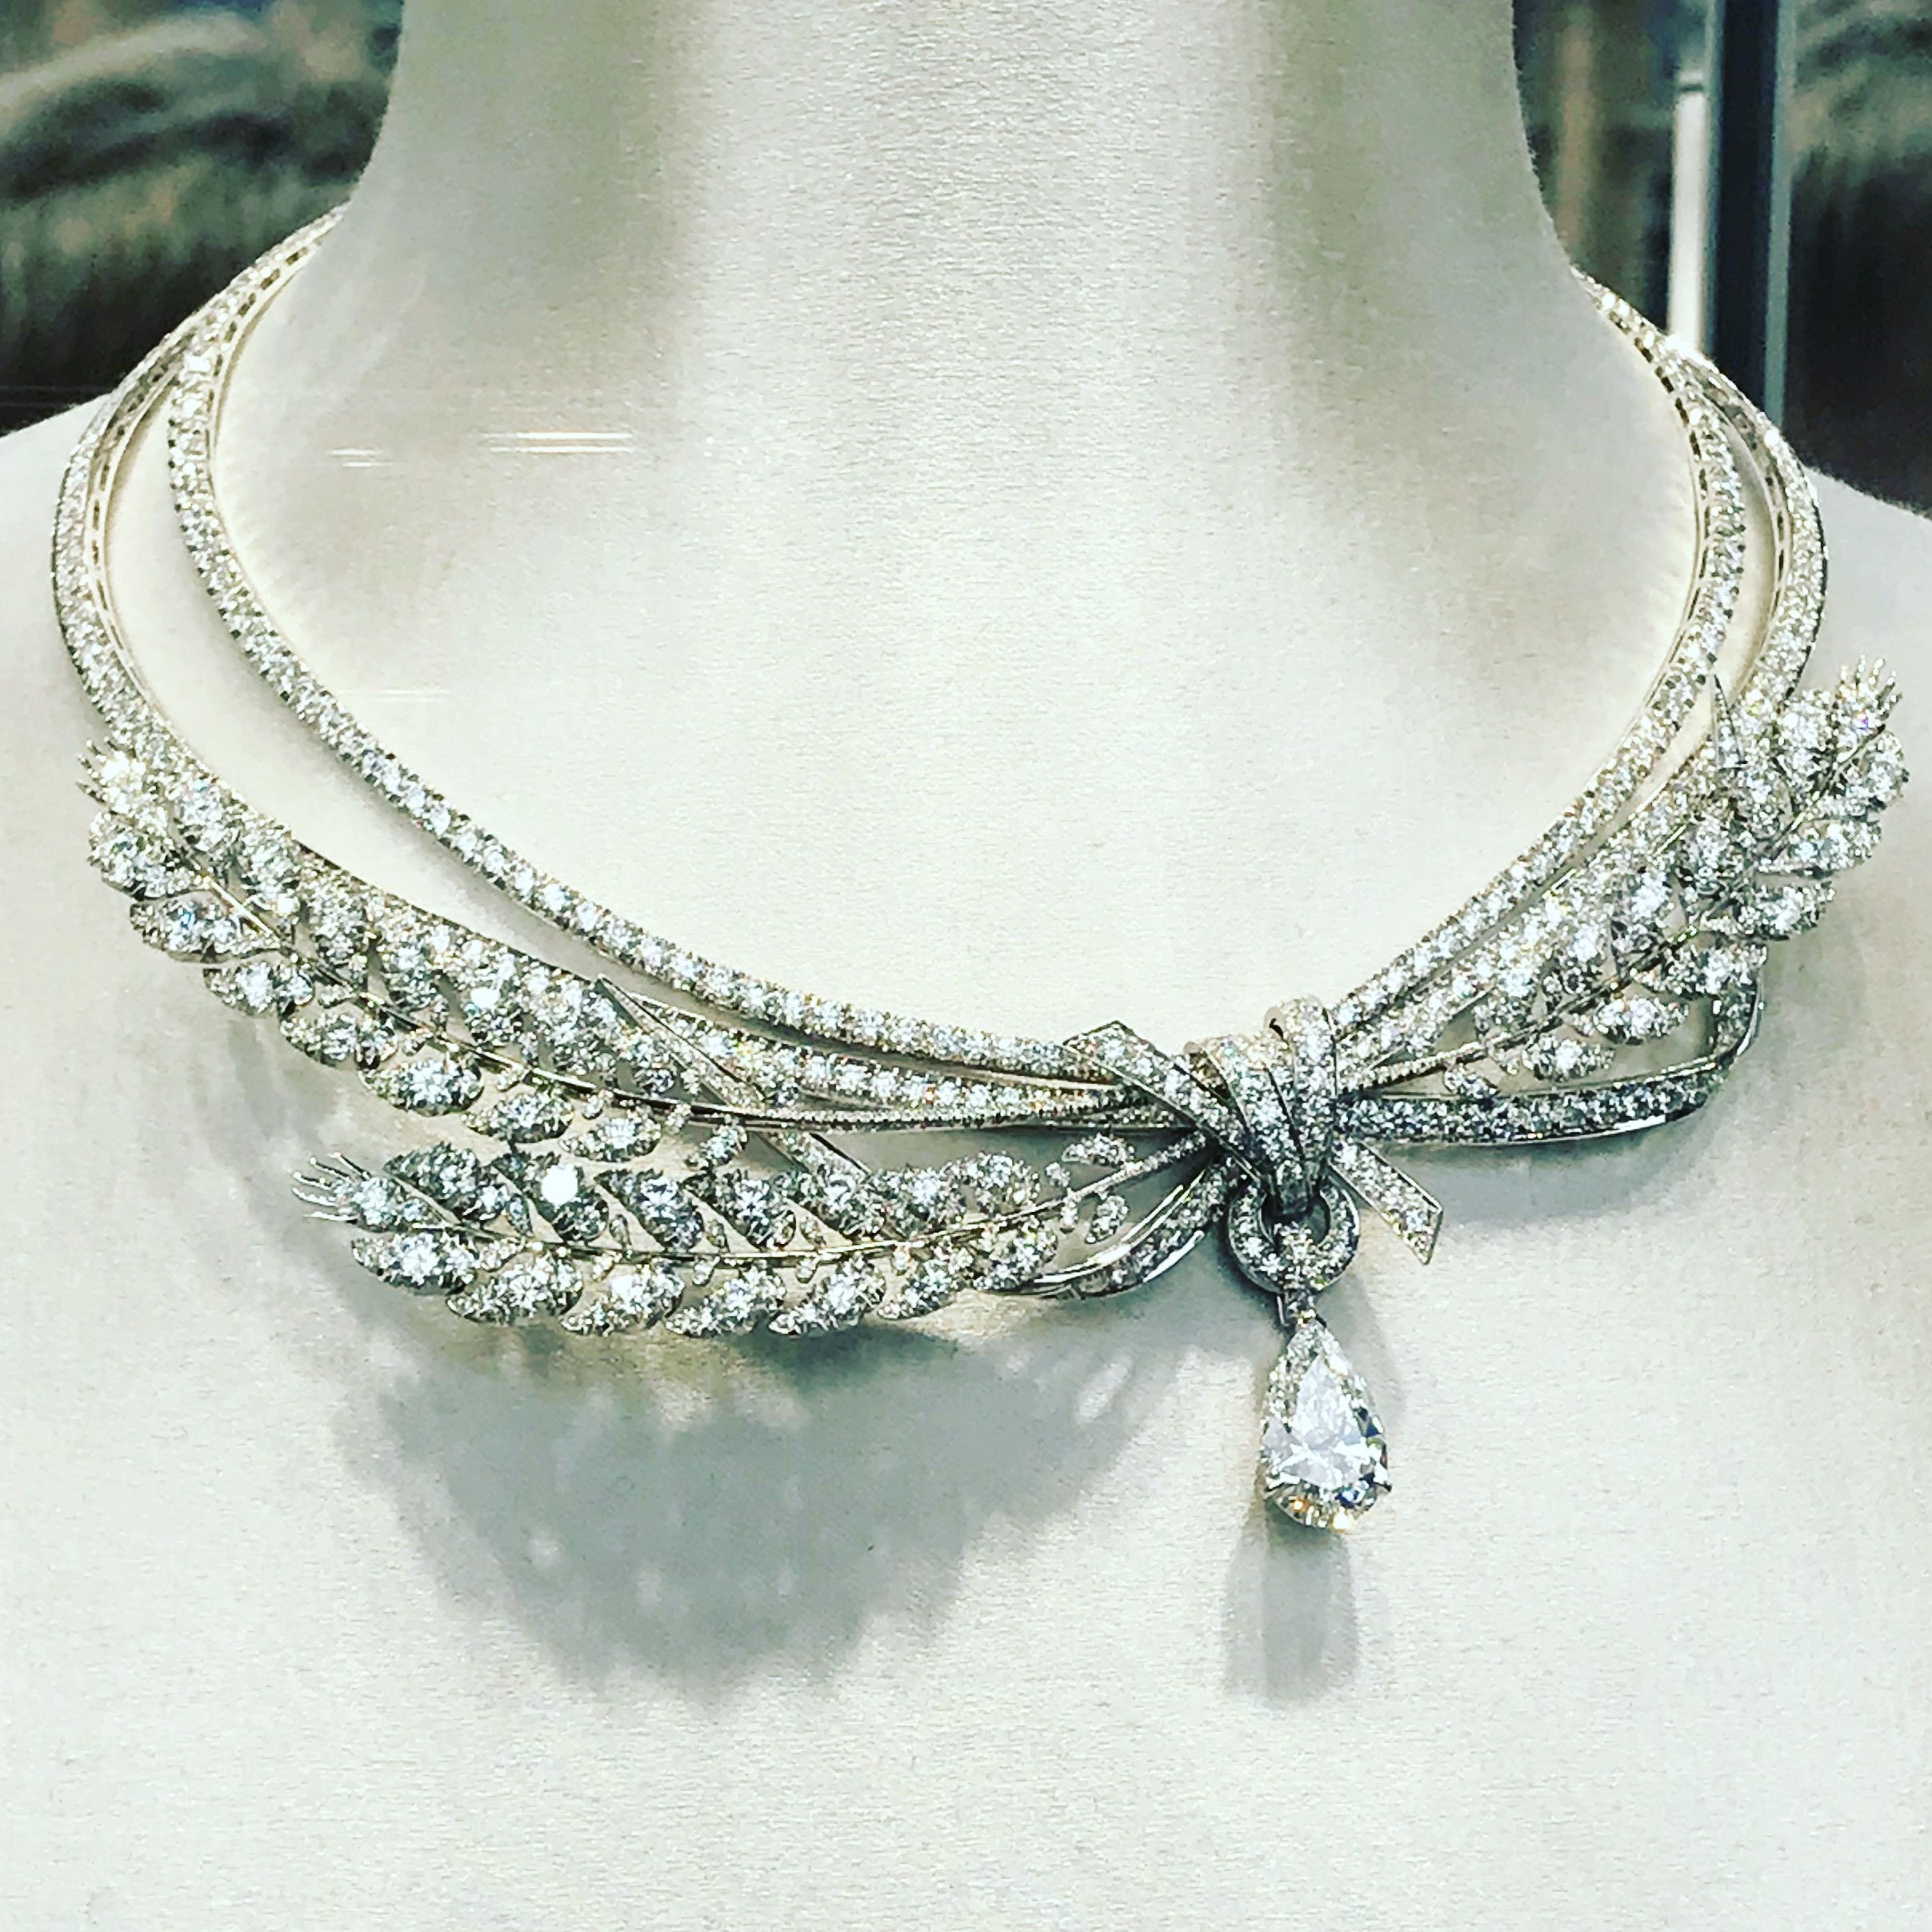 Chaumet Diamond Necklace With Neo Classic Shafts Of Wheat #chaumet With Most Up To Date Wheat Pendant Necklaces (View 8 of 25)